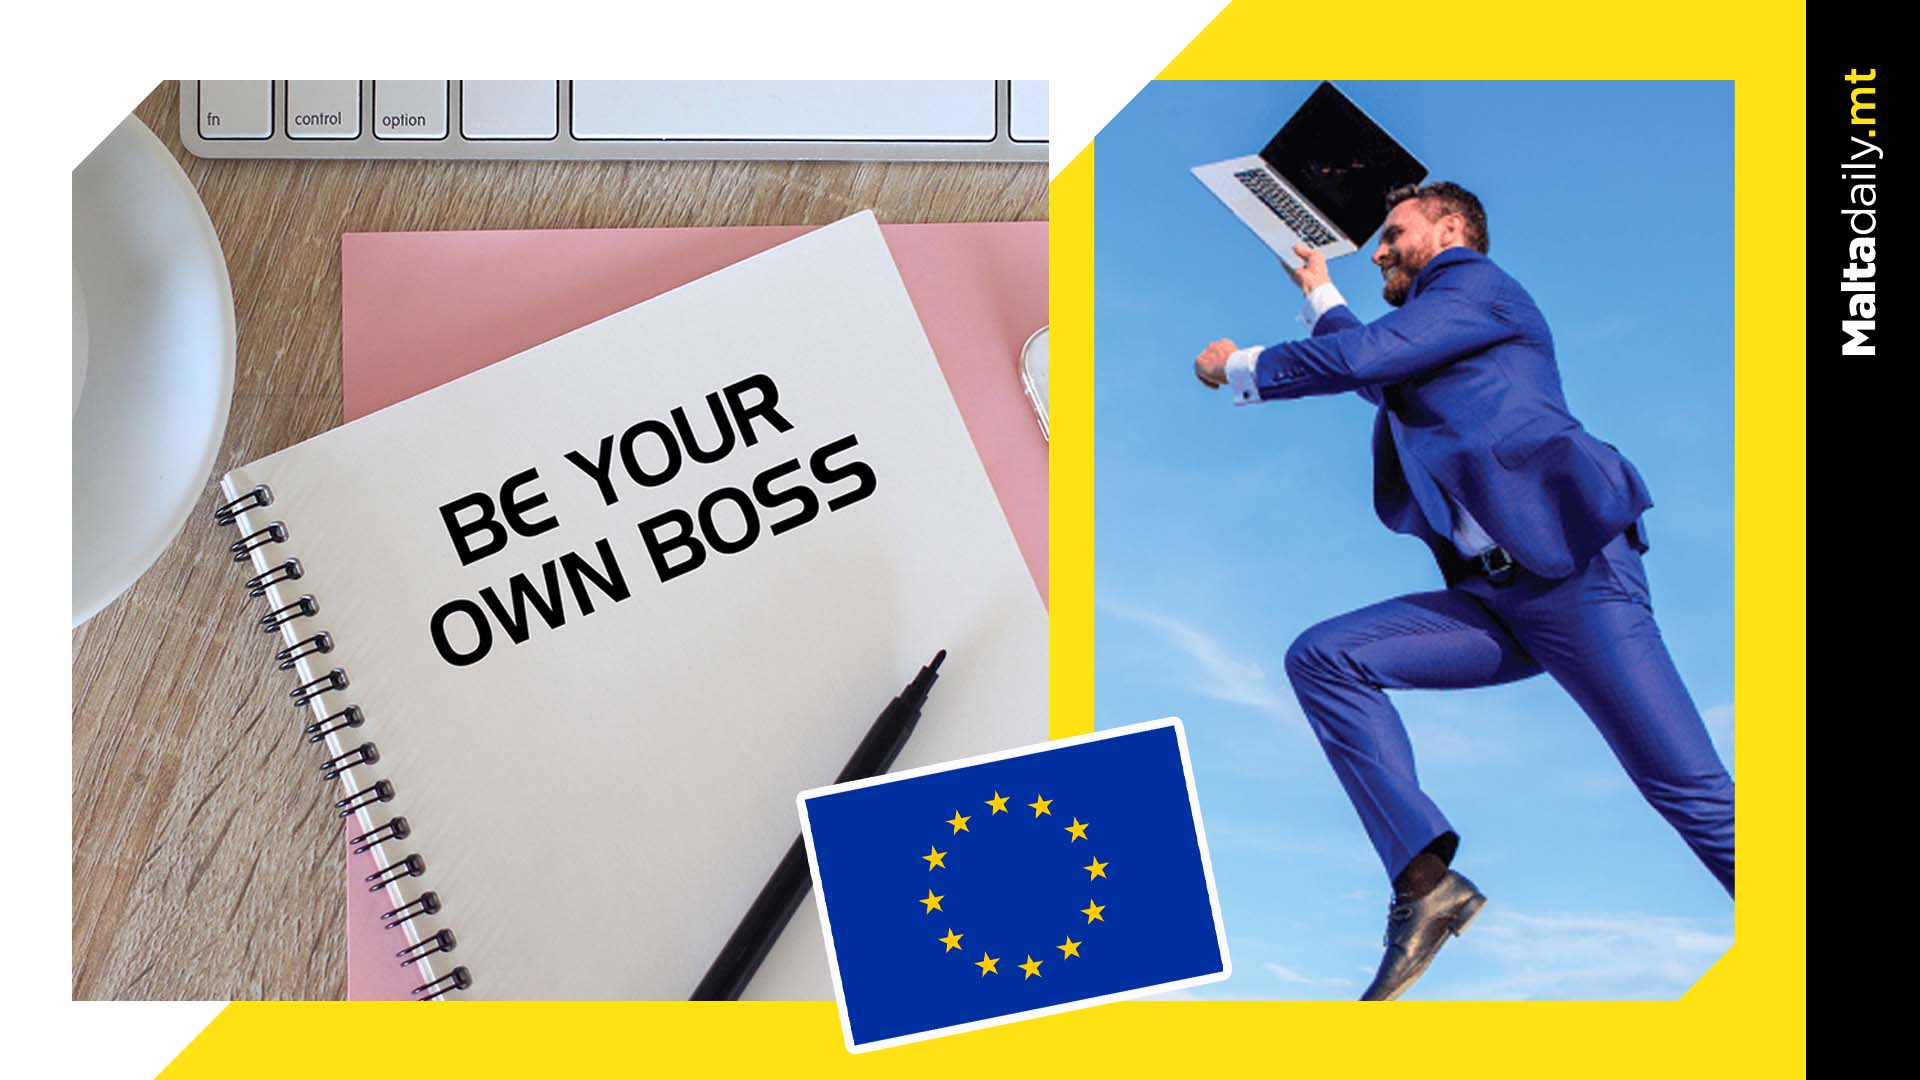 46% of EU youth aged 15-30 consider setting up their own business